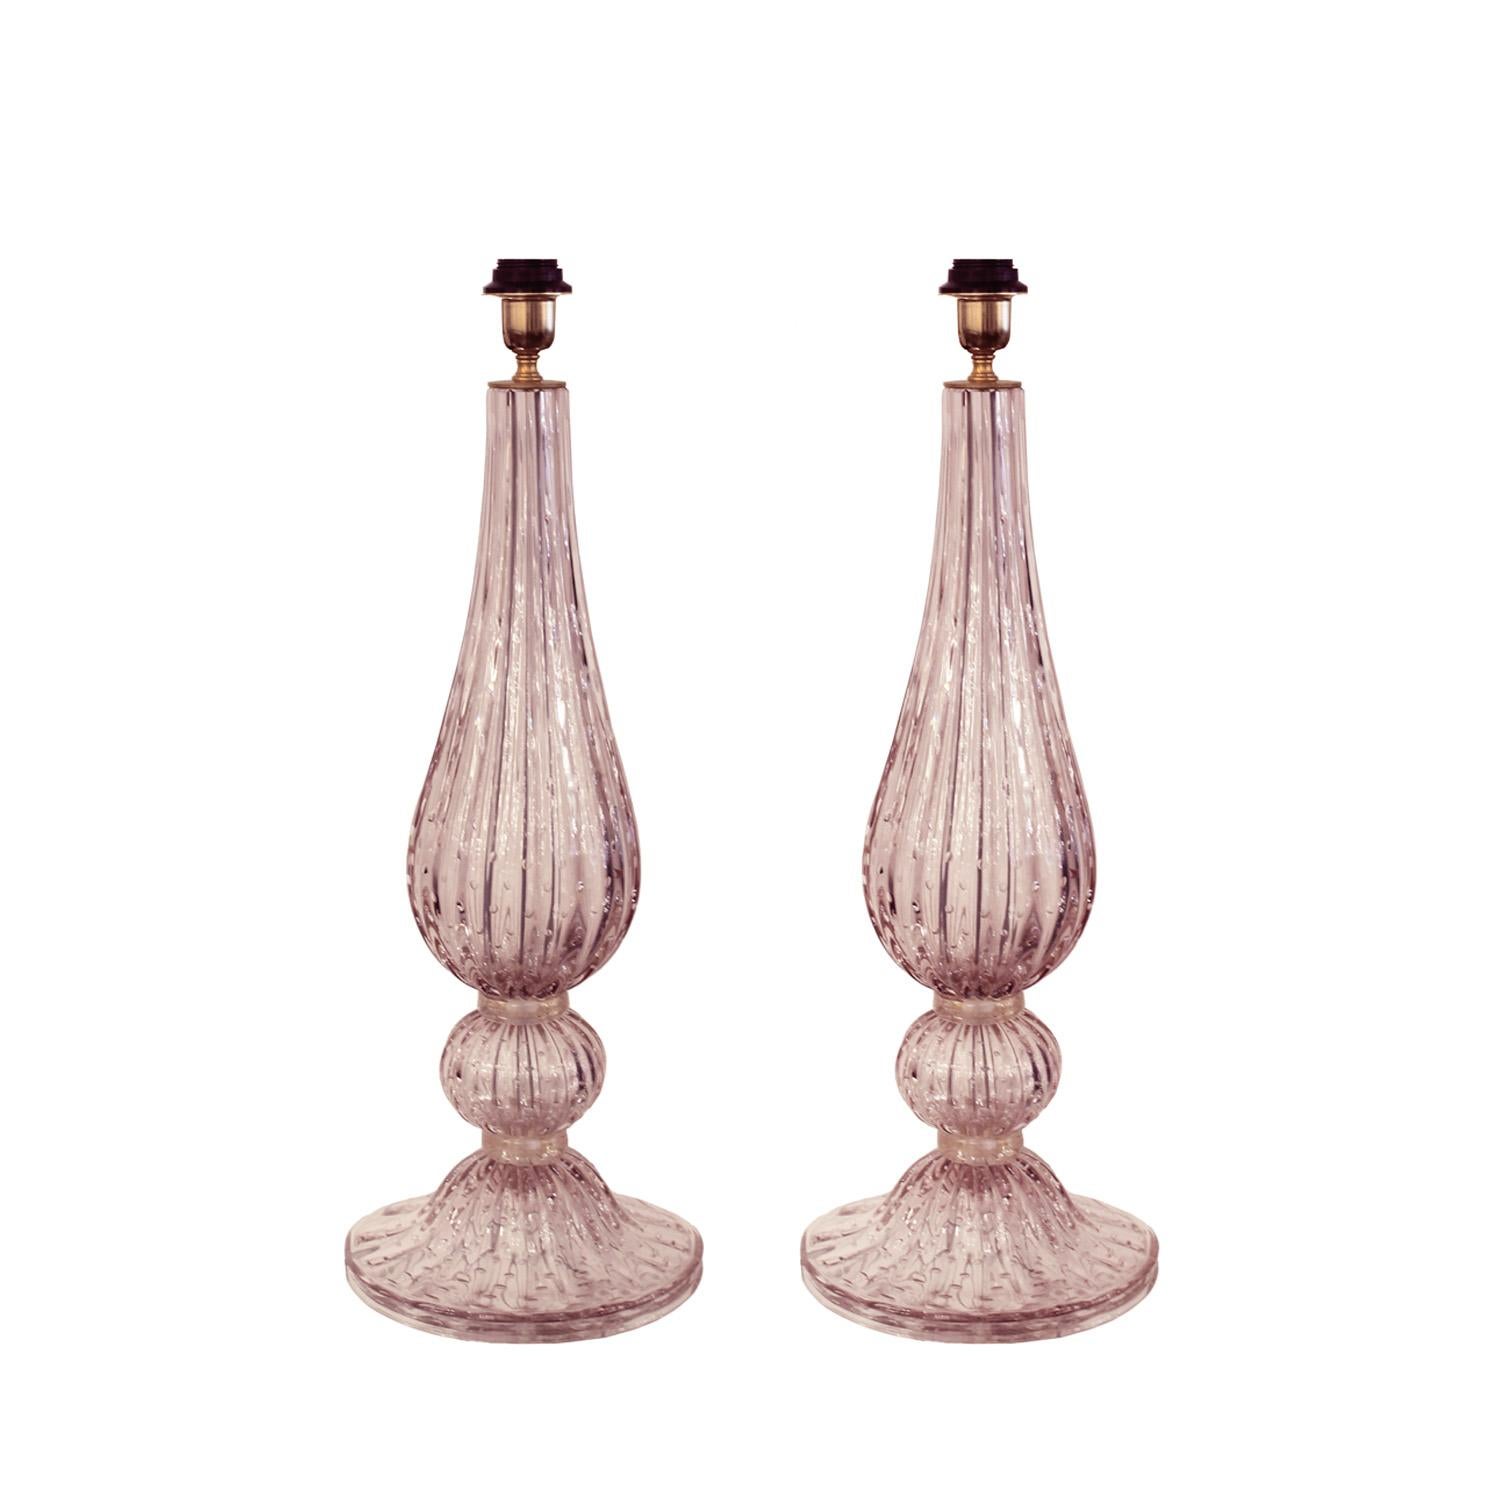 Elegant pair of hand-blown Murano Glass table lamps in clear and amethyst Bullicante glass with brass hardware in the manner of Barovier & Tosso. Italy 2002

Lamp shades sold separately.